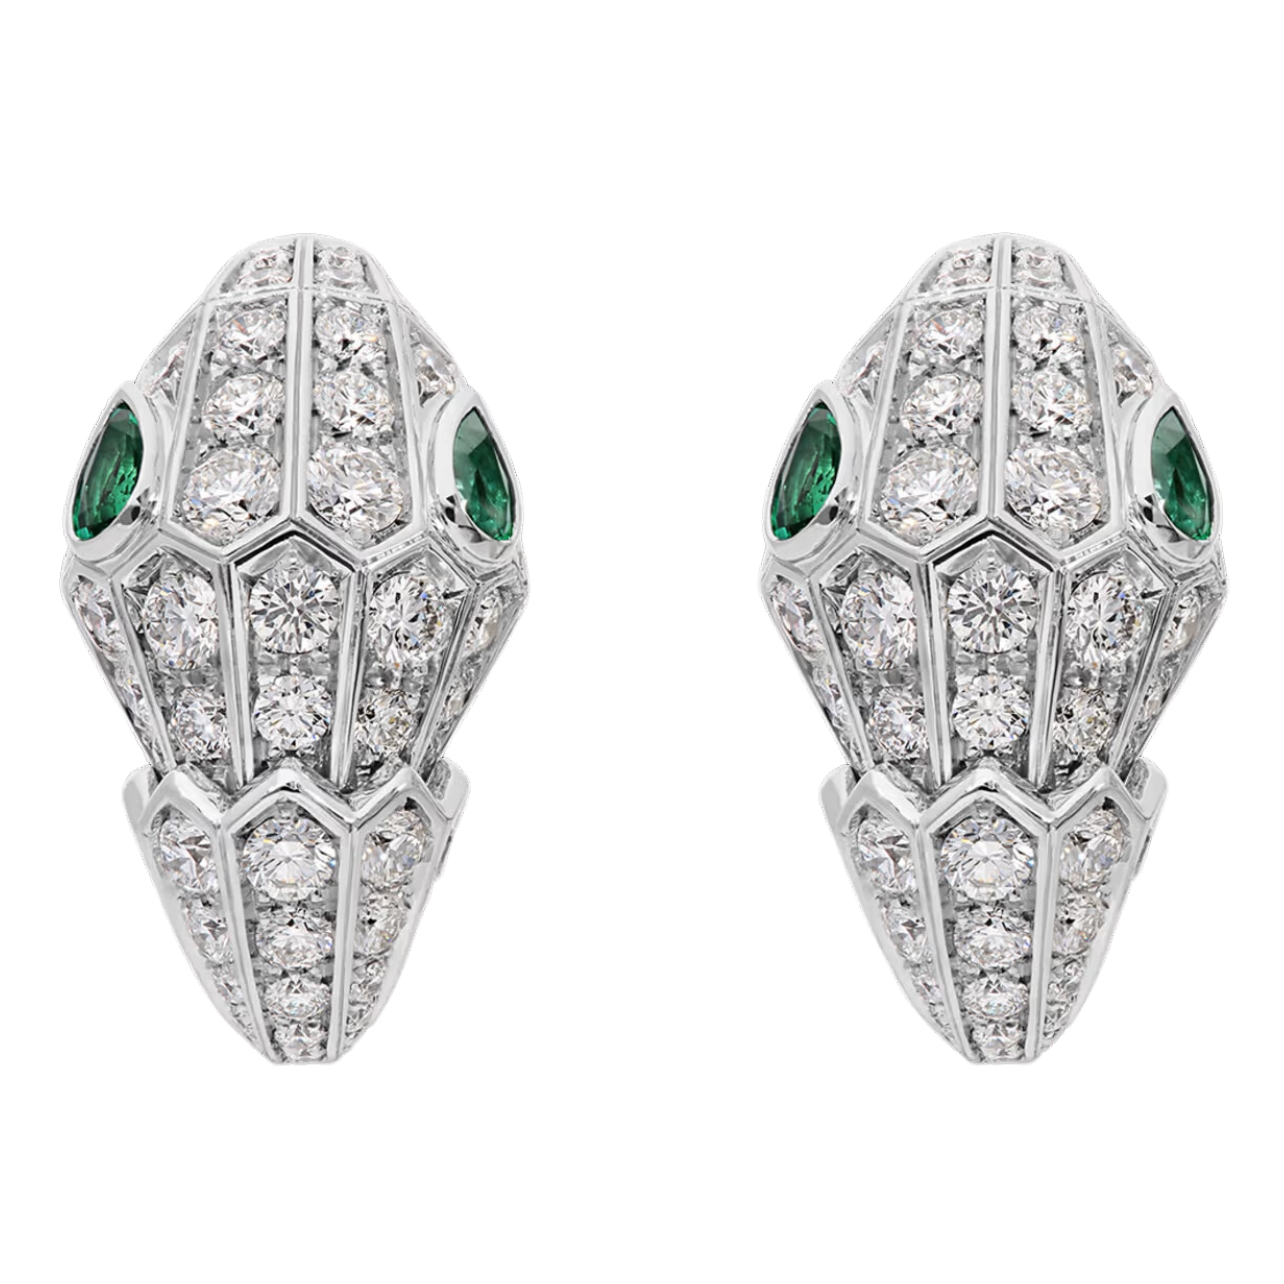 Bulgari serpenti earrings in 18k white gold with emerald eyes and pave diamonds